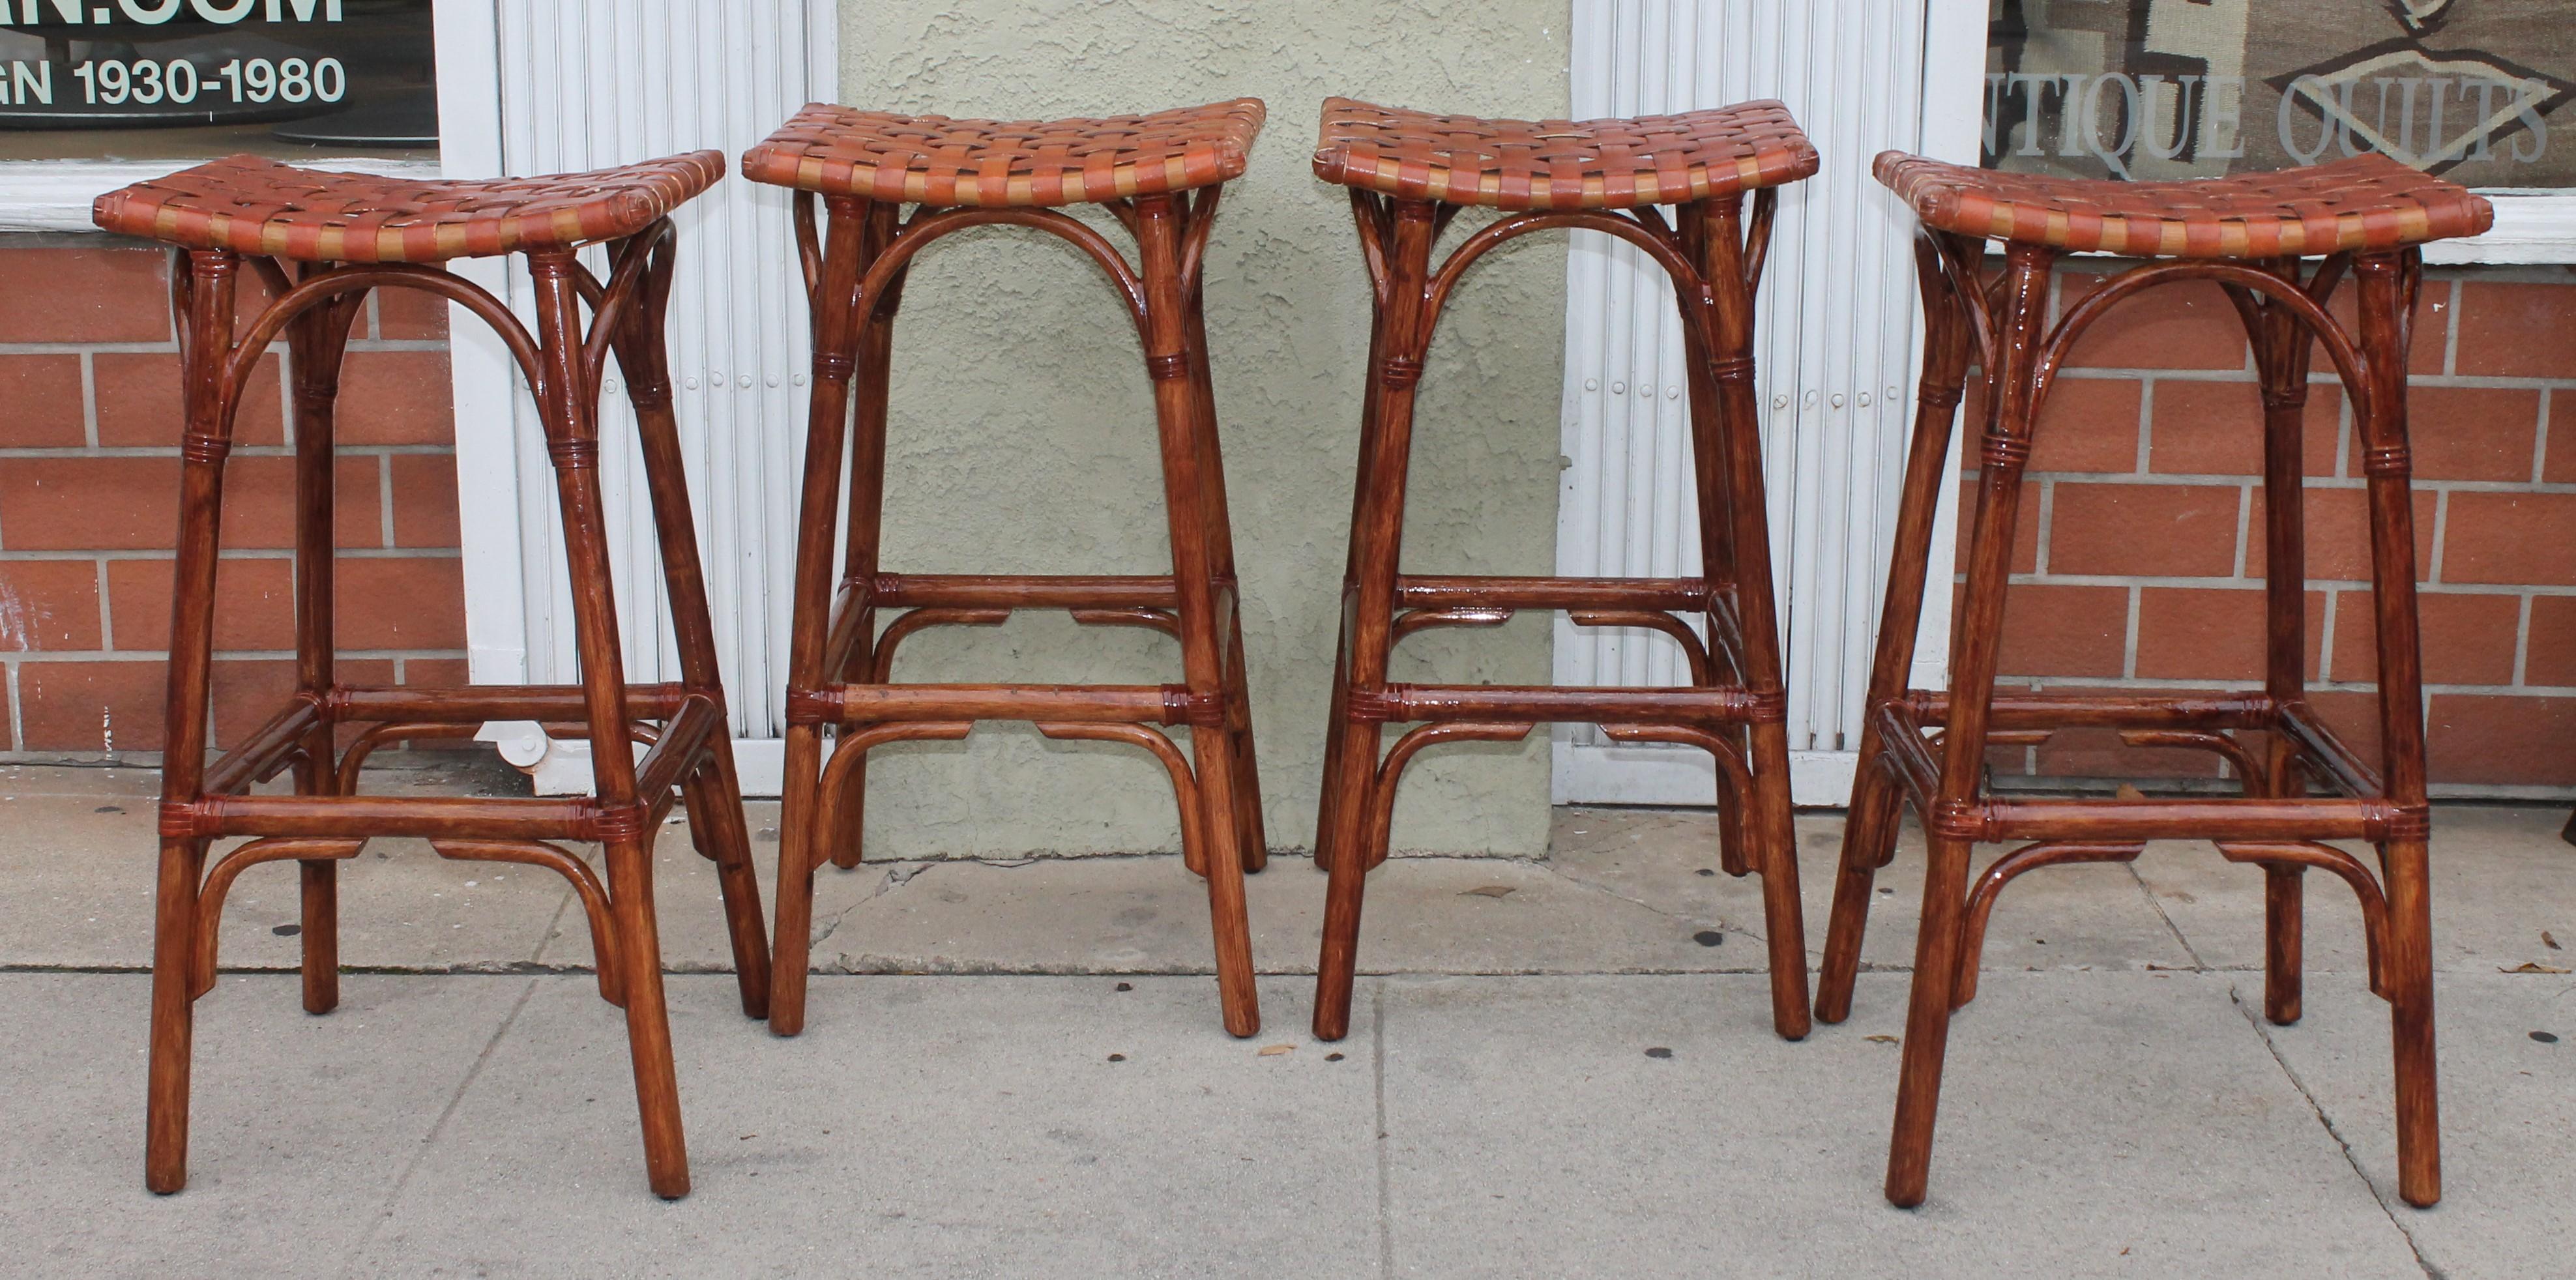 Hand-Woven Set of Four Bamboo Stools